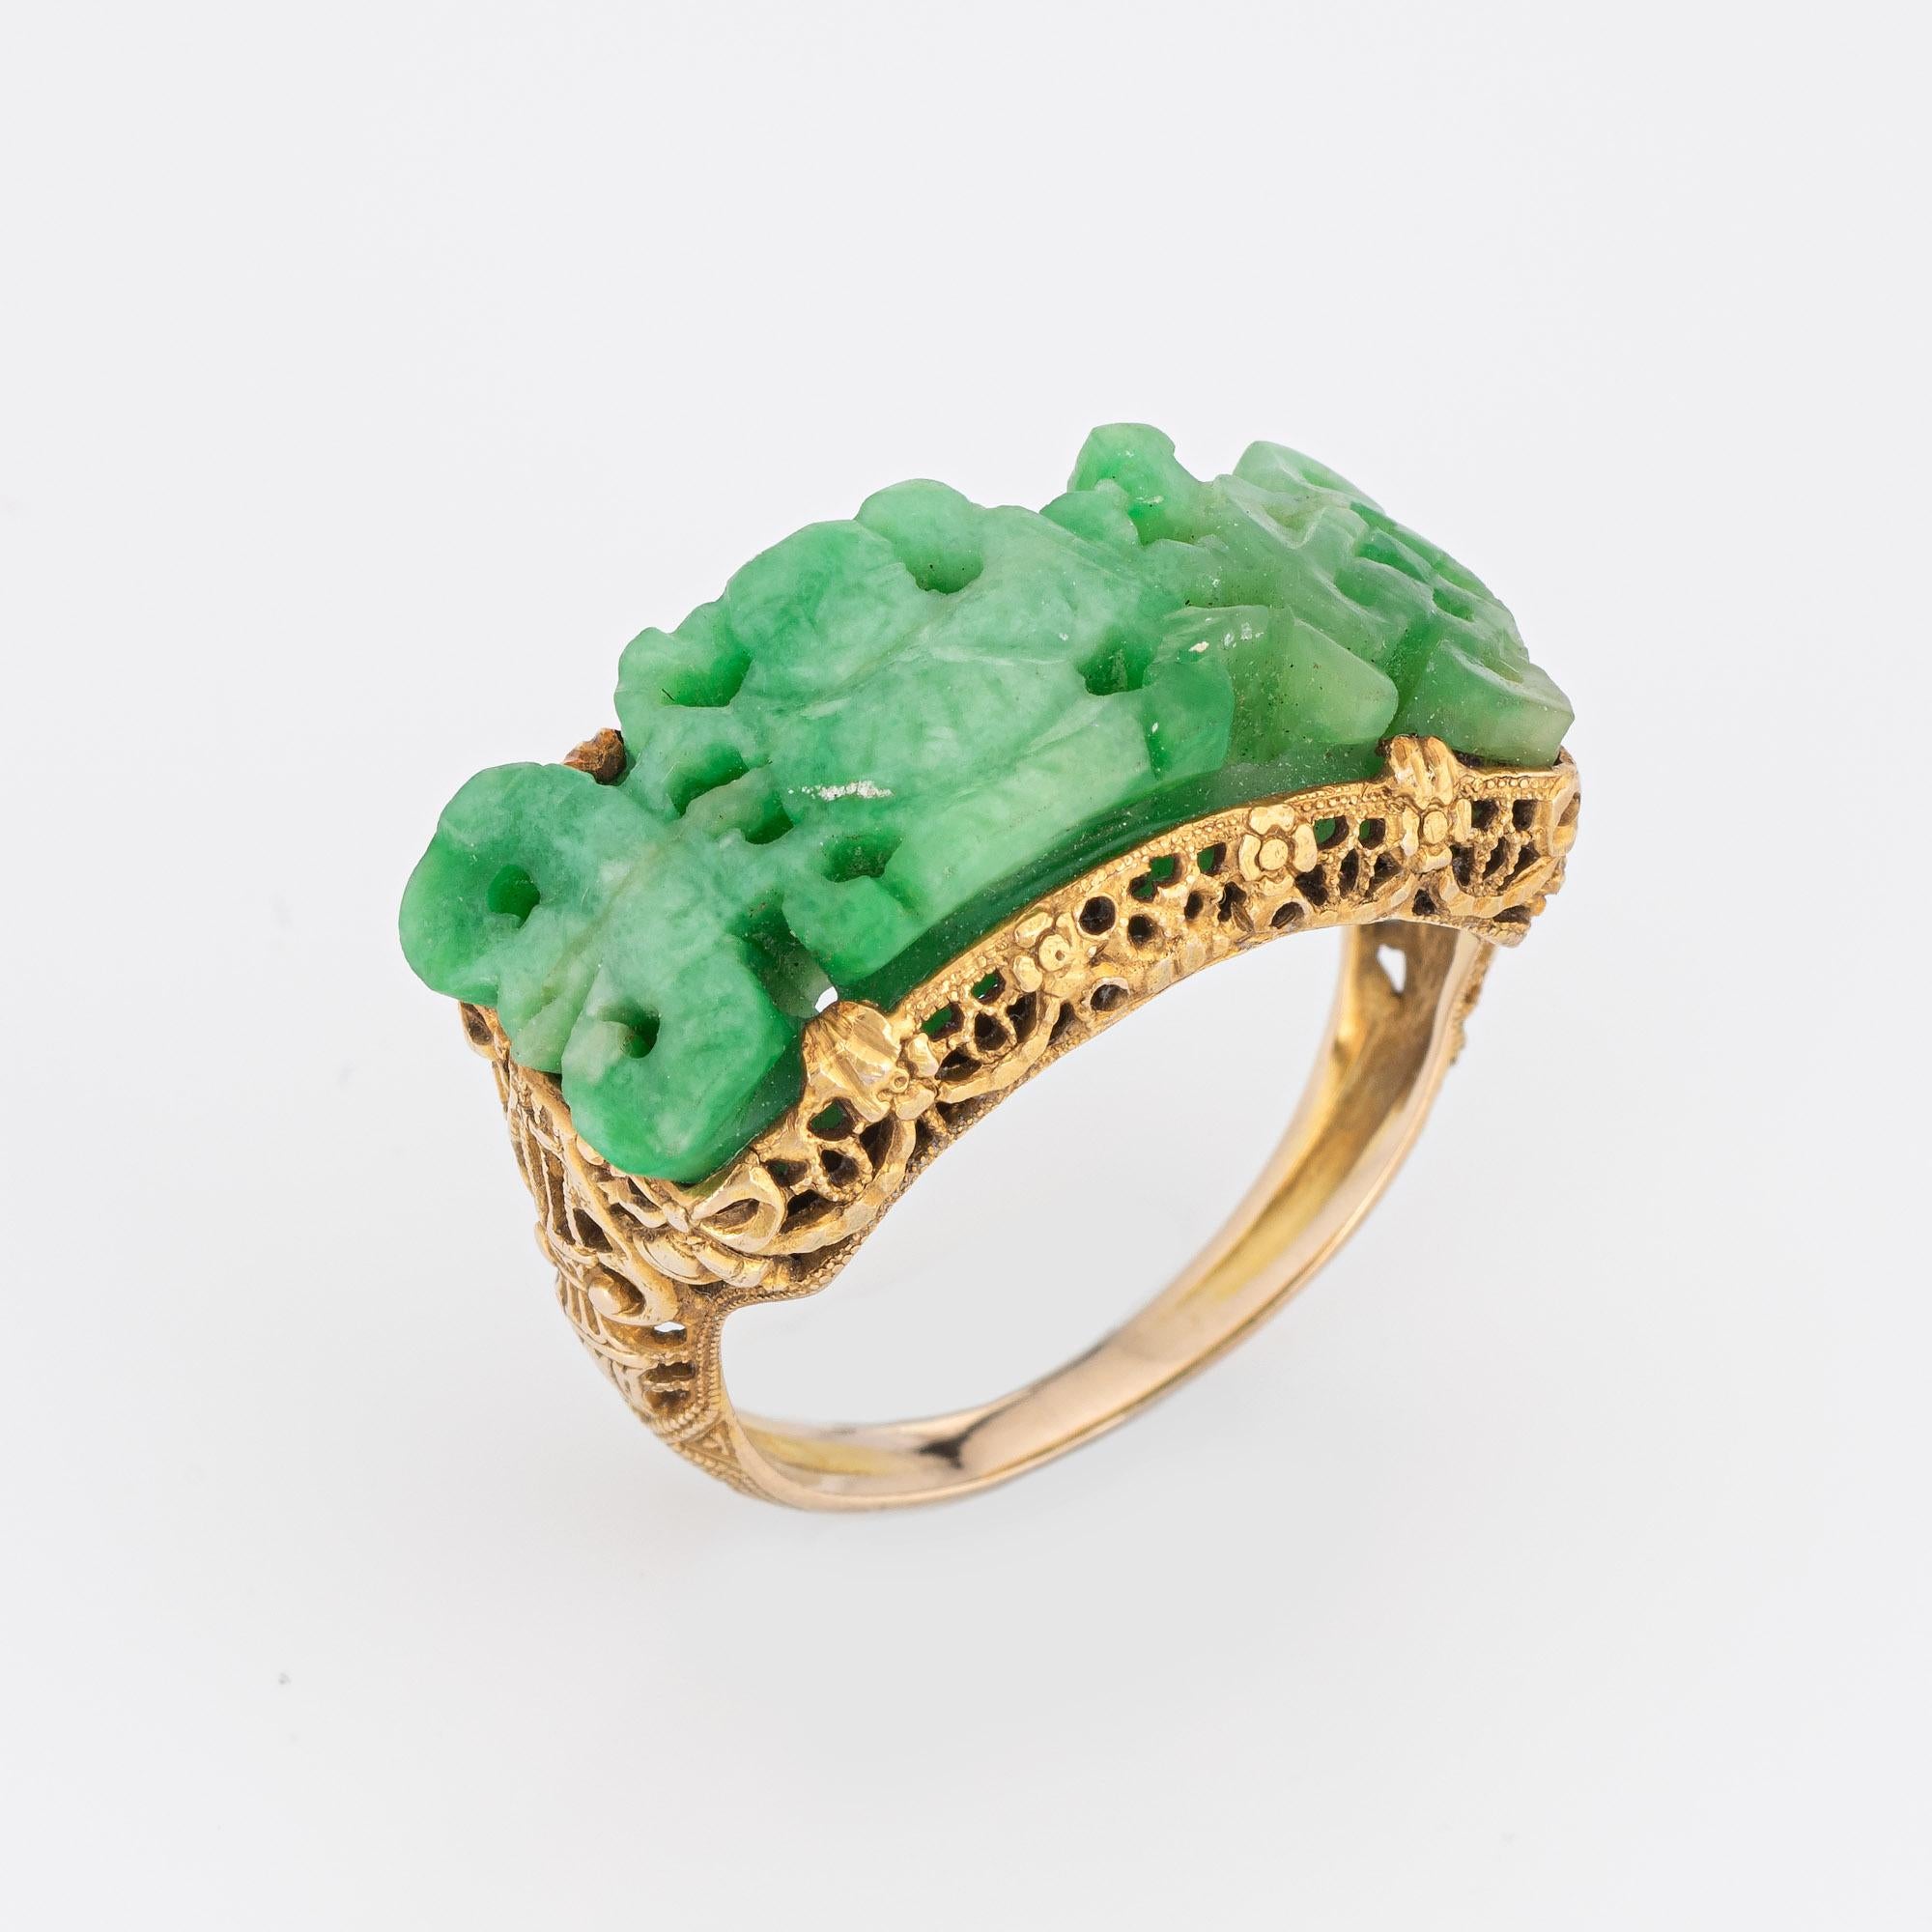 Finely detailed vintage Art Deco era carved jade ring (circa 1920s to 1930s) crafted in 14k yellow gold. 

Jade measures 24mm x 10mm.  

The finely detailed Art Deco ring captures the essence of the iconic era. The center set carved jade highlights